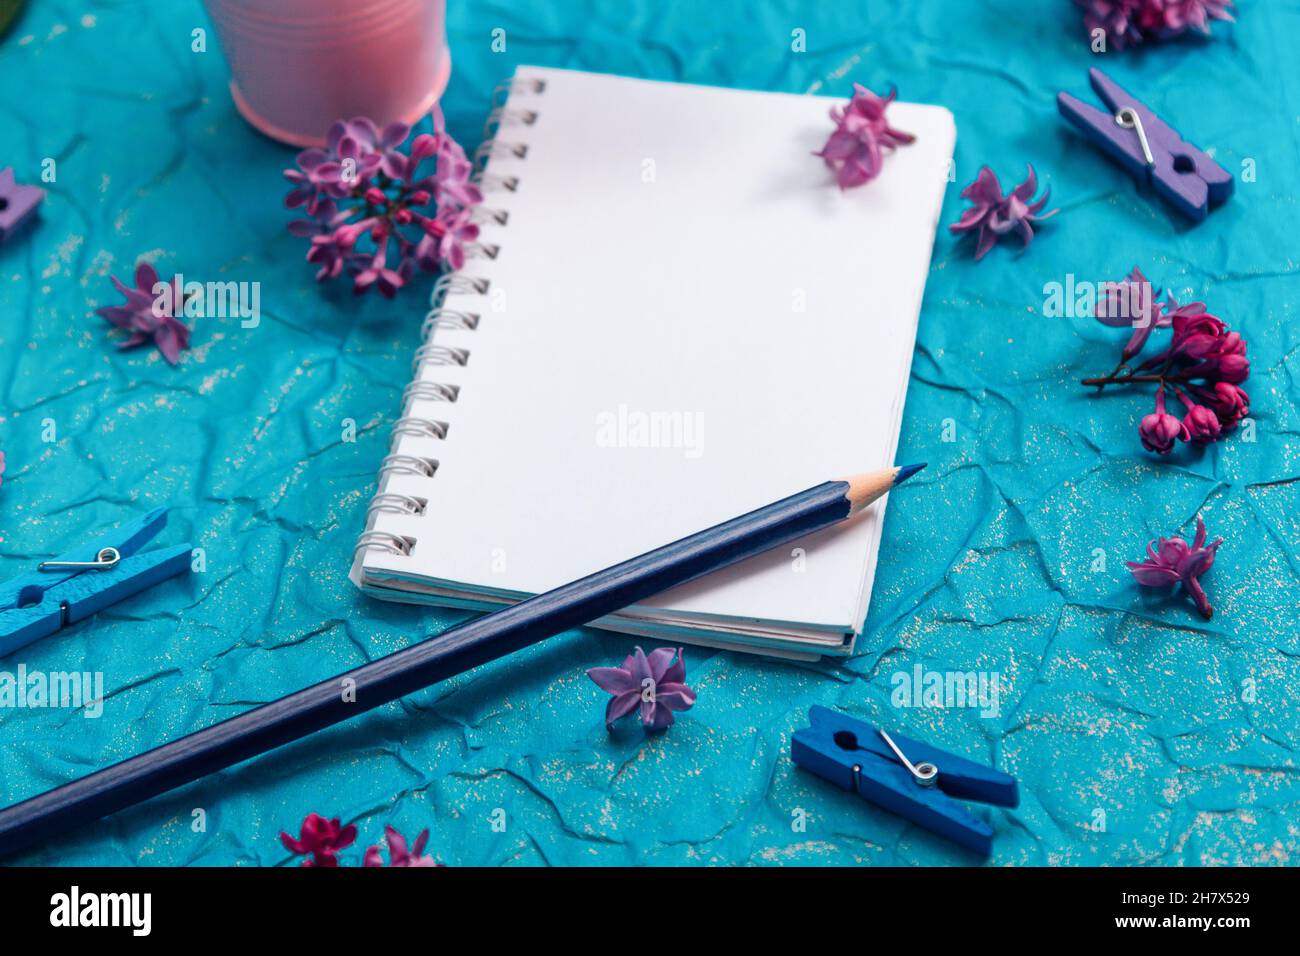 Blank notebook, pencil and lilac flowers on vintage painted blue cardboard background Stock Photo